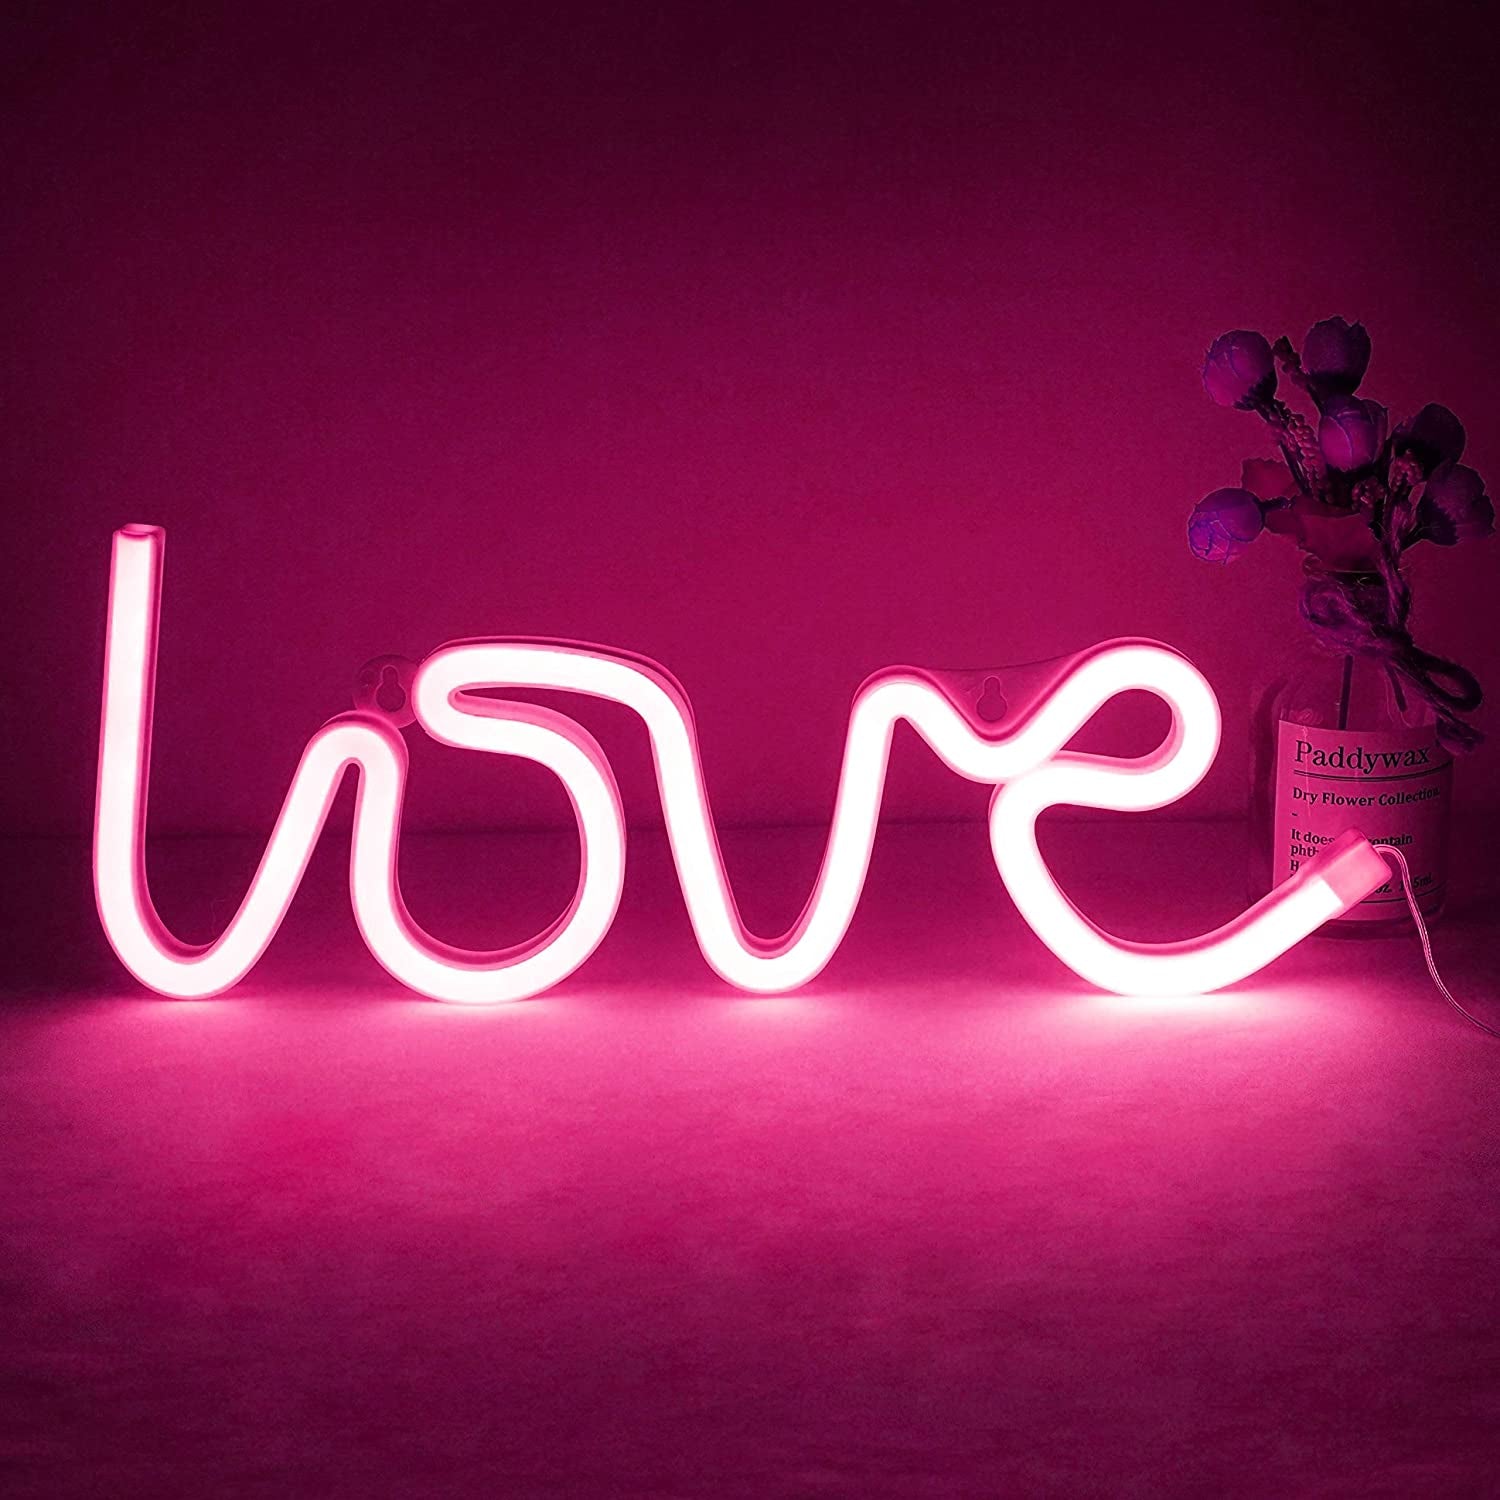 Love Neon Light, Cute Neon Love Sign, Battery or USB Powered Night Light as Wall Decor for Kids Room, Bedroom, Festival, Party (Pink)